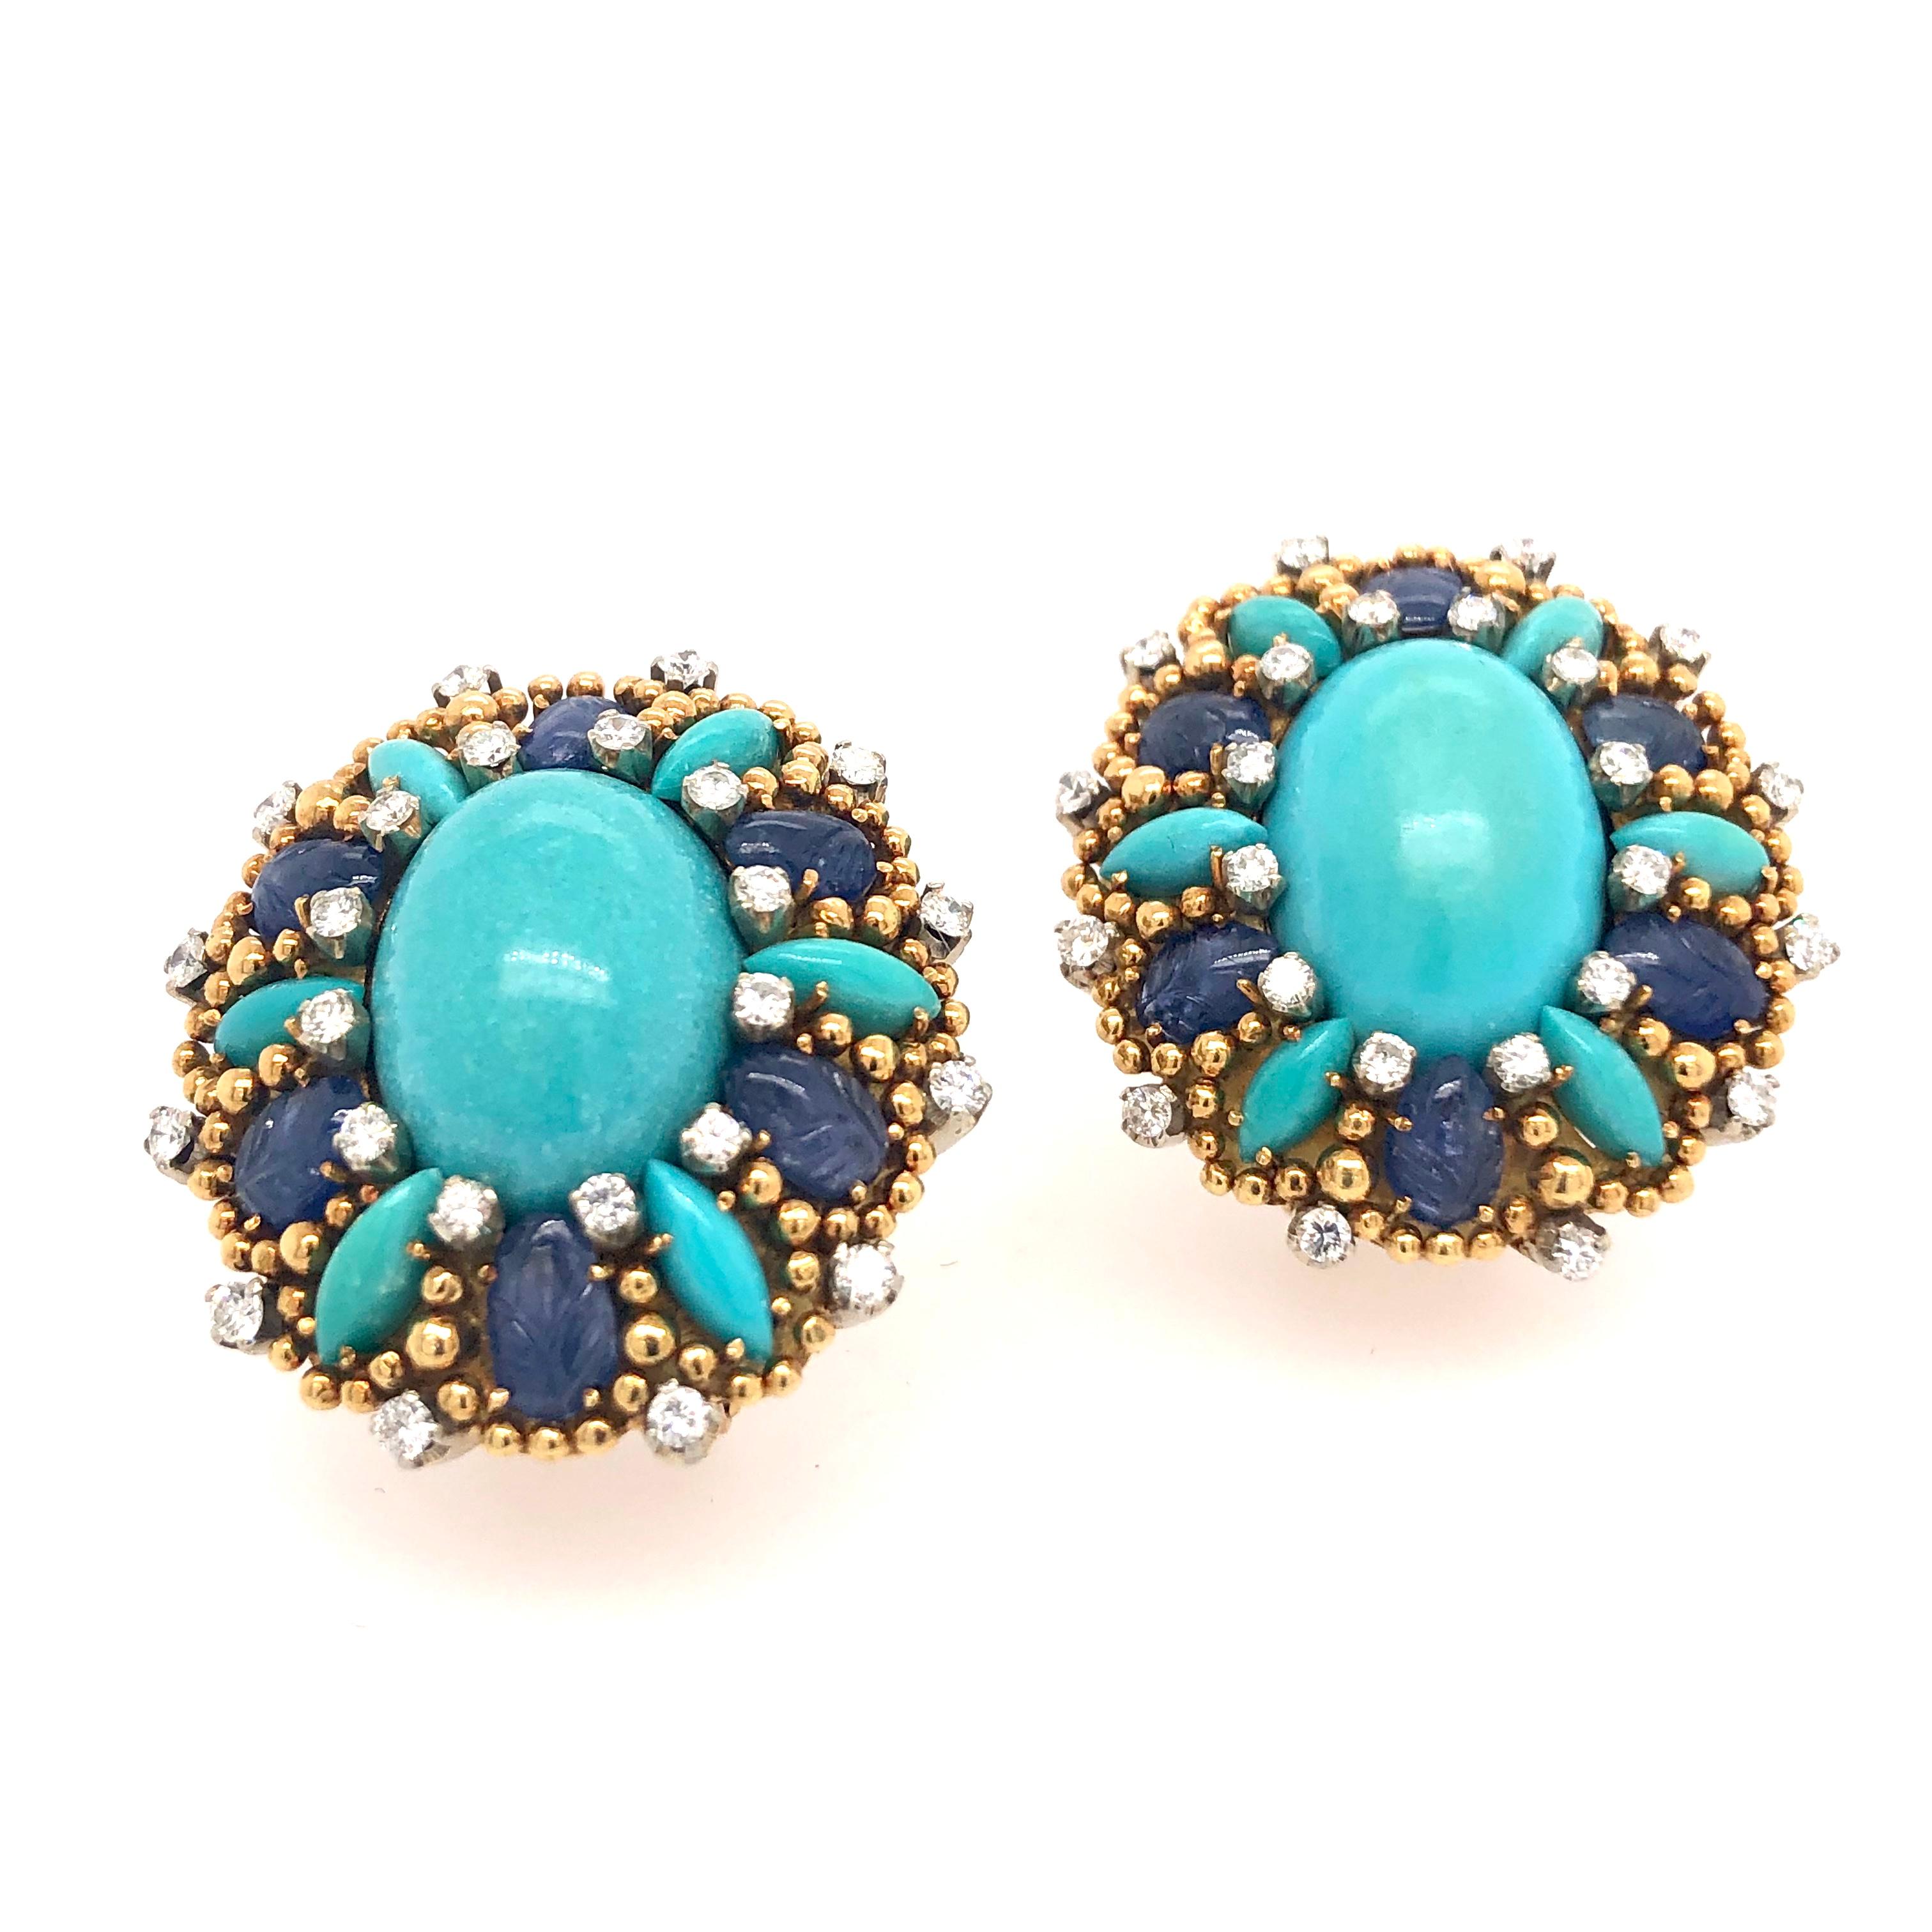 A beautiful specimen of craftsmanship and artistry these turquoise, sapphire, and diamond earrings from Tiffany & Co. are made to impress. The details go all the way into the sapphires which are carved with a floral motif. The stones are set into